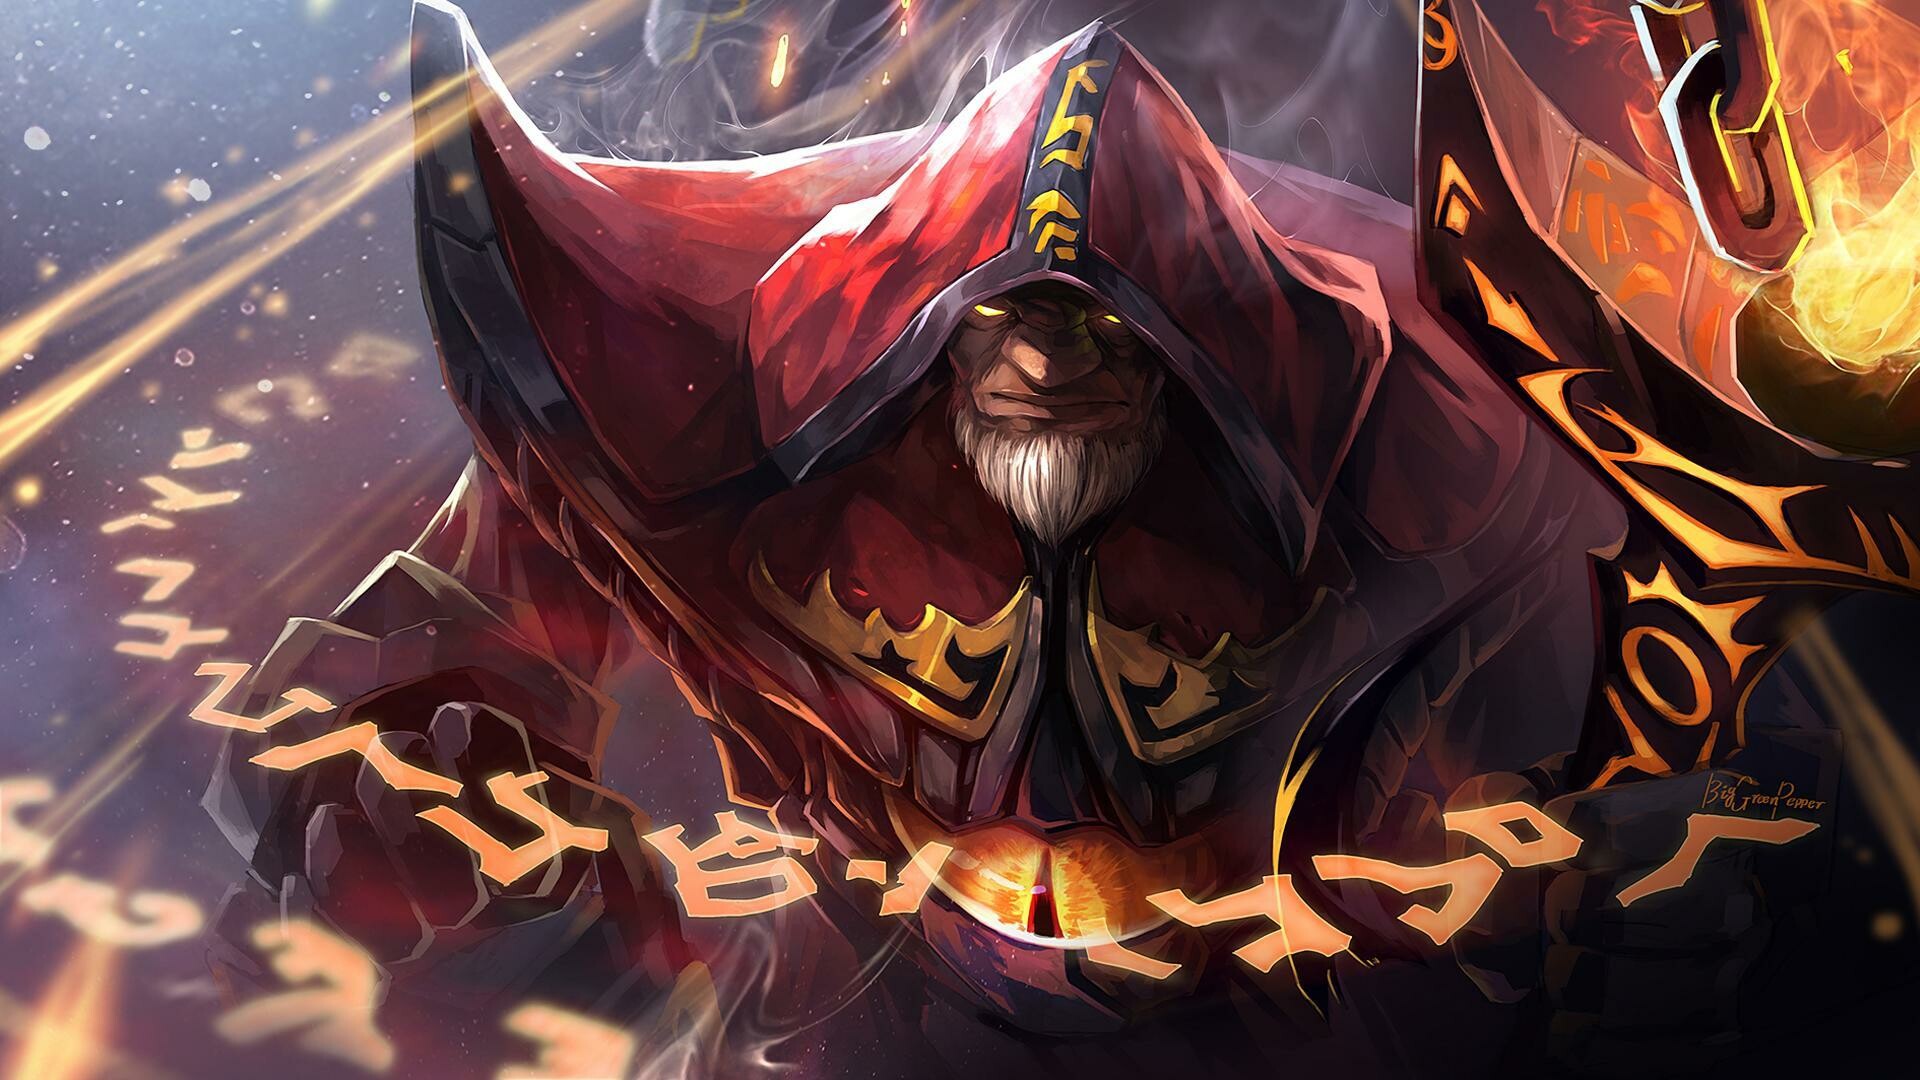 Dota 2: Warlock, Summons powerful demons to fight at his side. 1920x1080 Full HD Background.